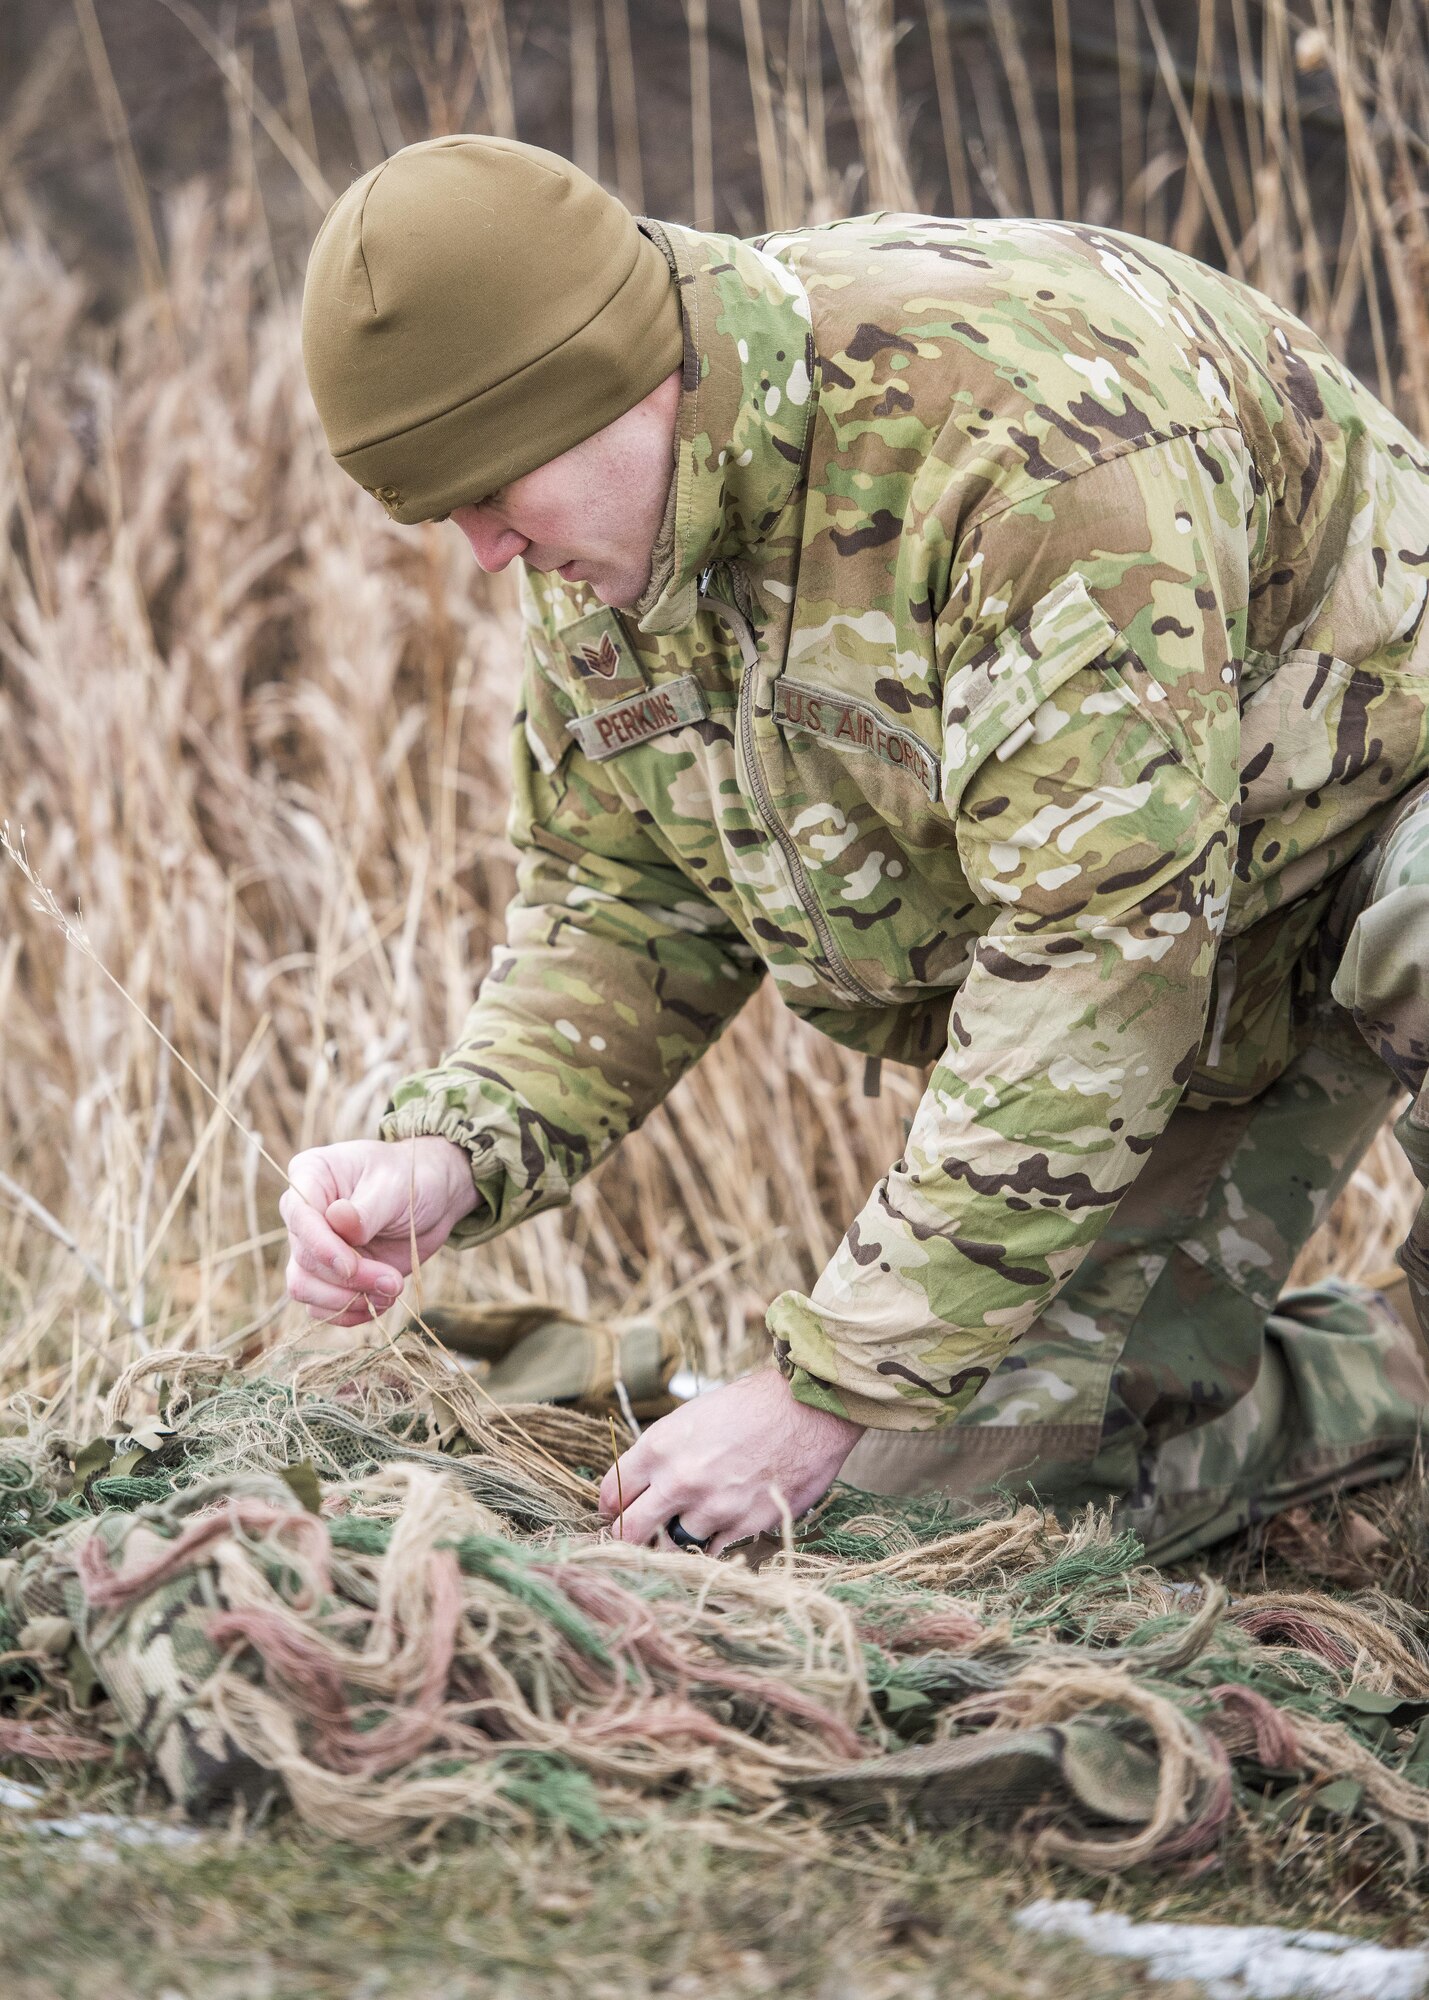 Staff Sgt. Bryan Perkins, 791st Missile Security Forces Squadron defender, sews foliage on to his ghillie suit during joint-unit training at Minot Air Force Base, N.D., Nov. 22, 2017. During training, Airmen added natural elements such as sticks and grass to their camouflage suits to better integrate themselves in a variety of locations. (U.S. Air Force photo by Senior Airman J.T. Armstrong)